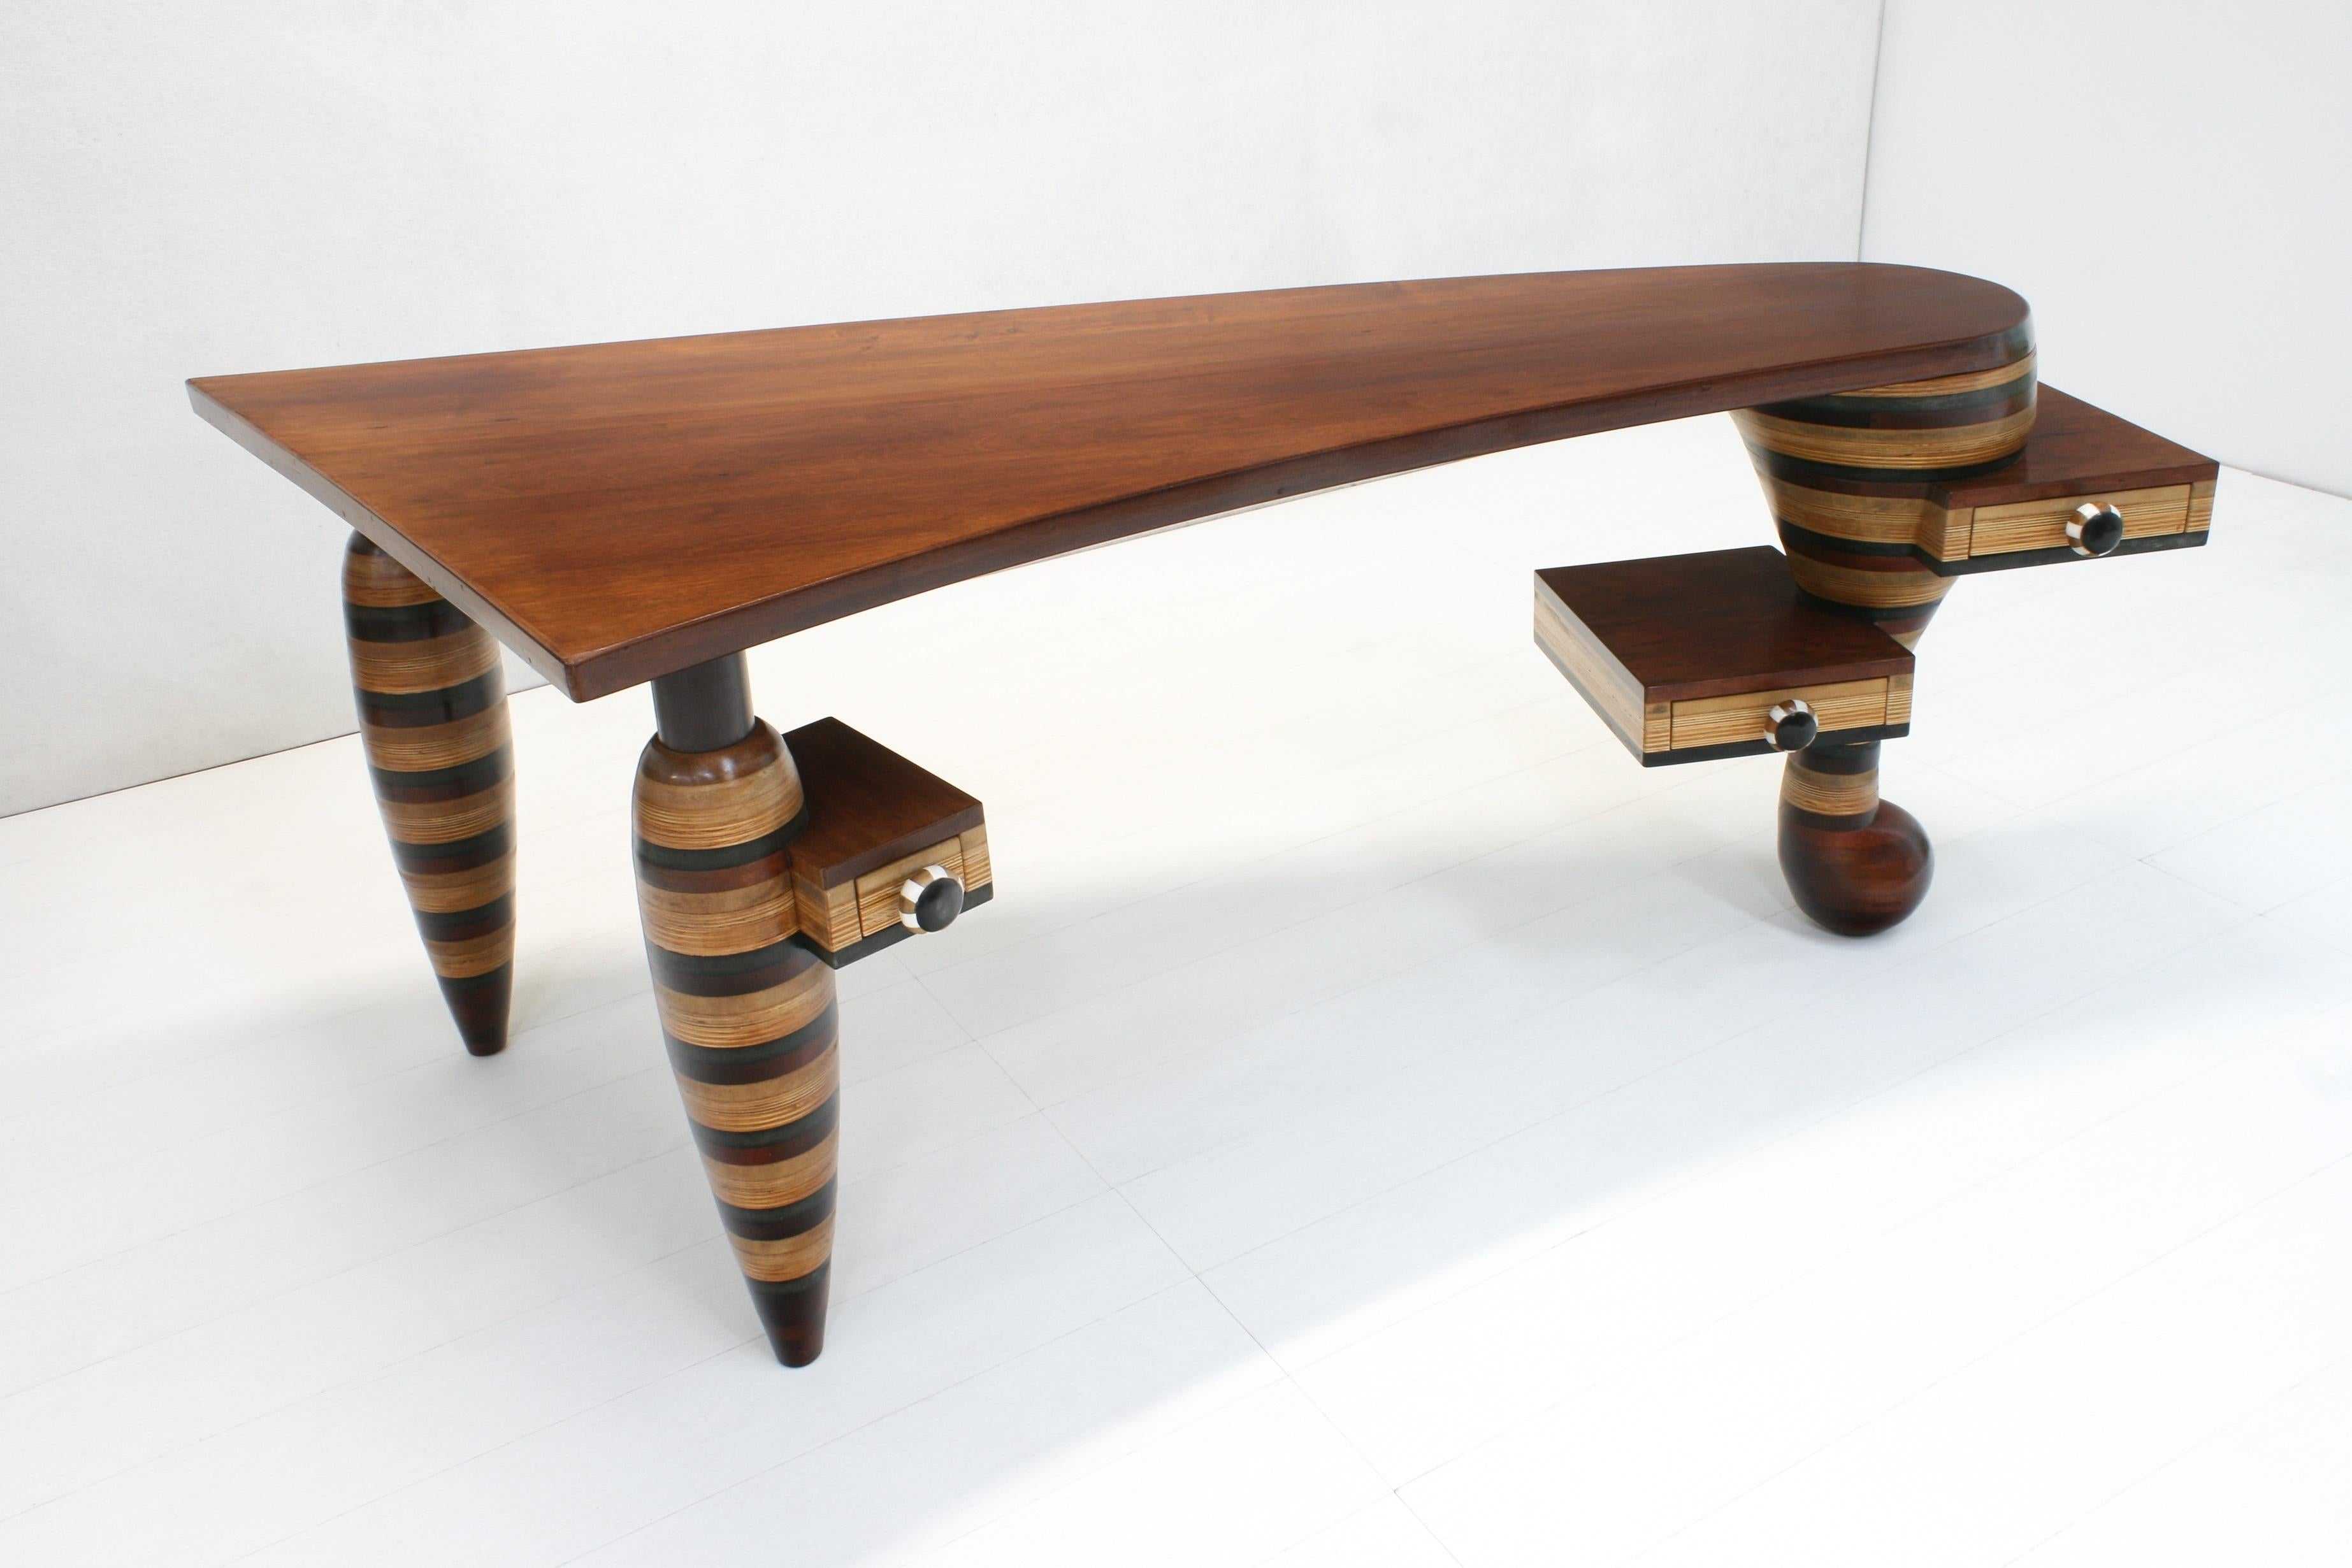 Post-Modern Most Unique Handcrafted Organic 3-Legged Laminated Cherry Wood Desk For Sale